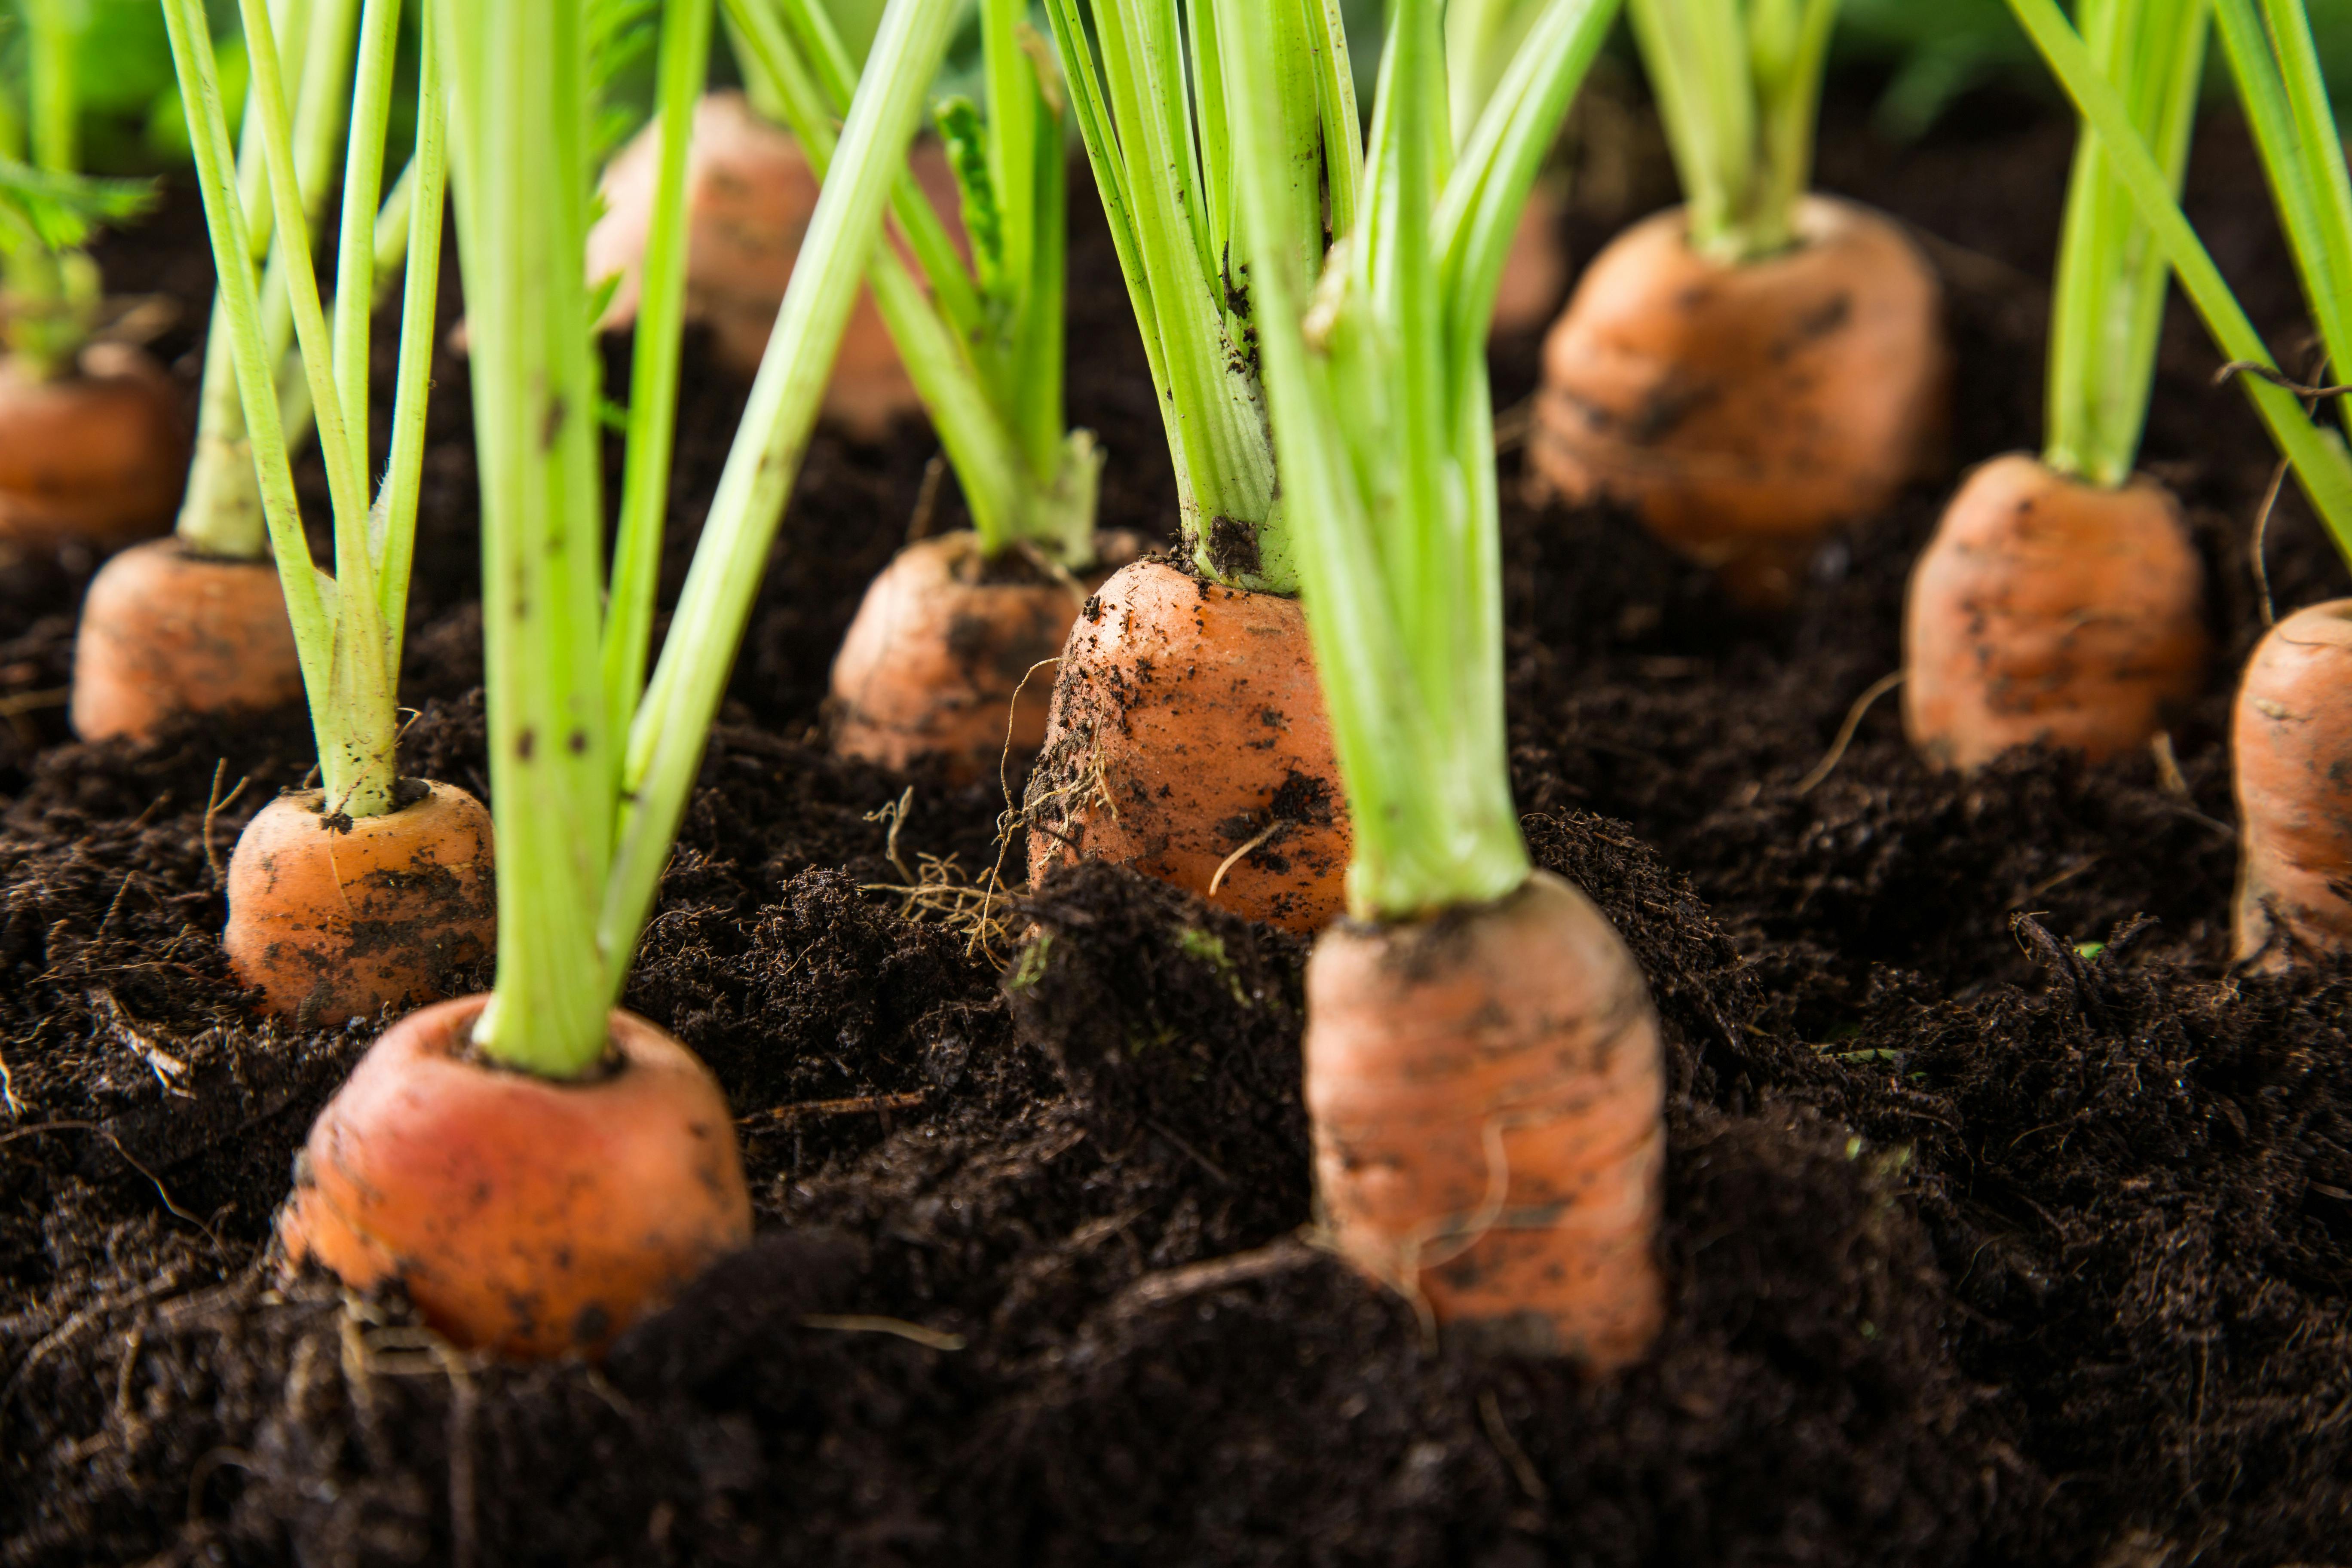 Carrots sprouting out of soil